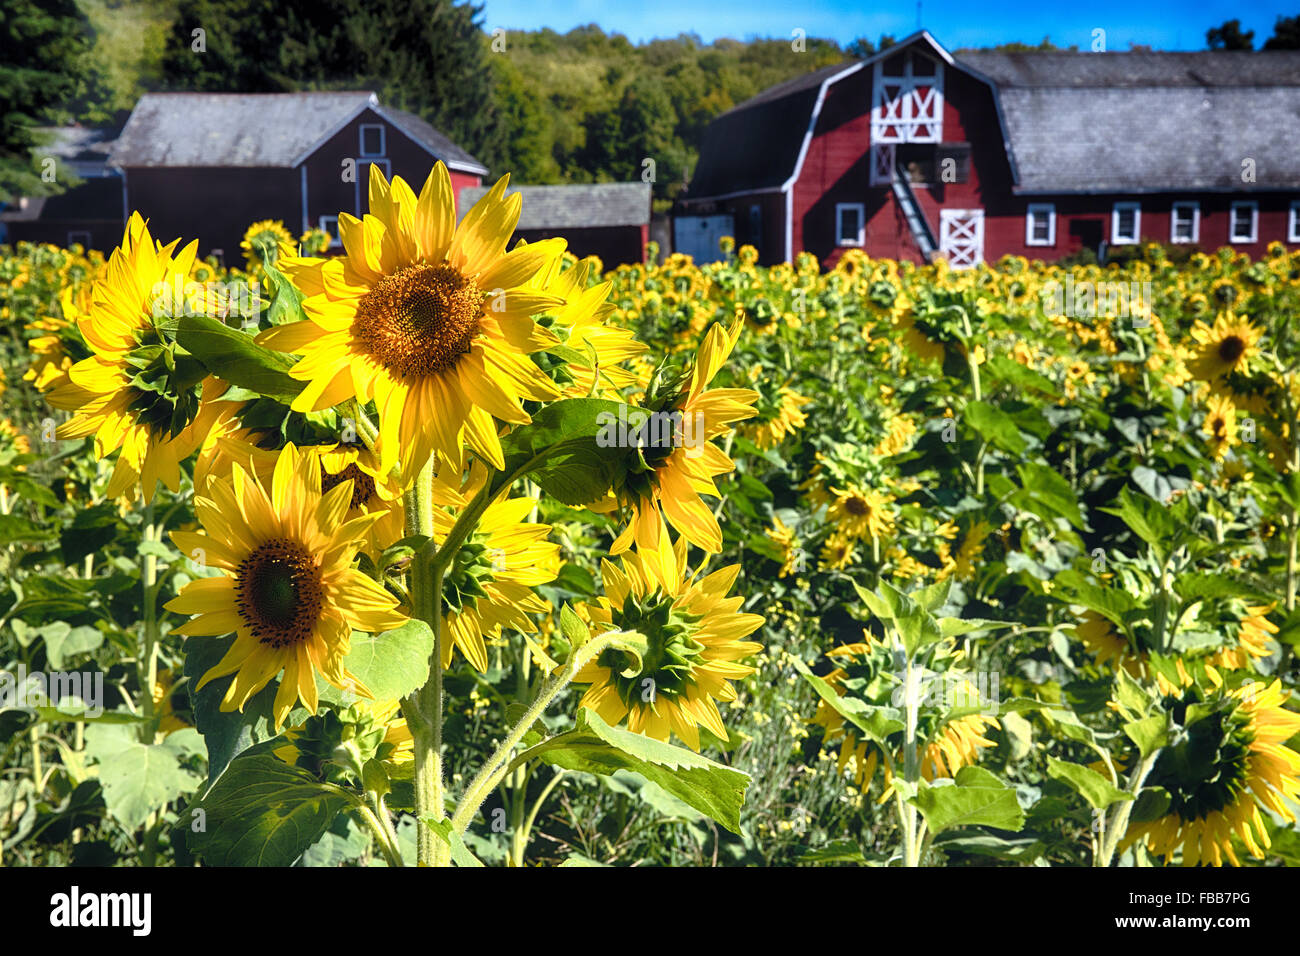 Close Up View of Sunflowers in a Filed with a Red Barn in the Background, Sparta, Sussex County, New Jersey Stock Photo